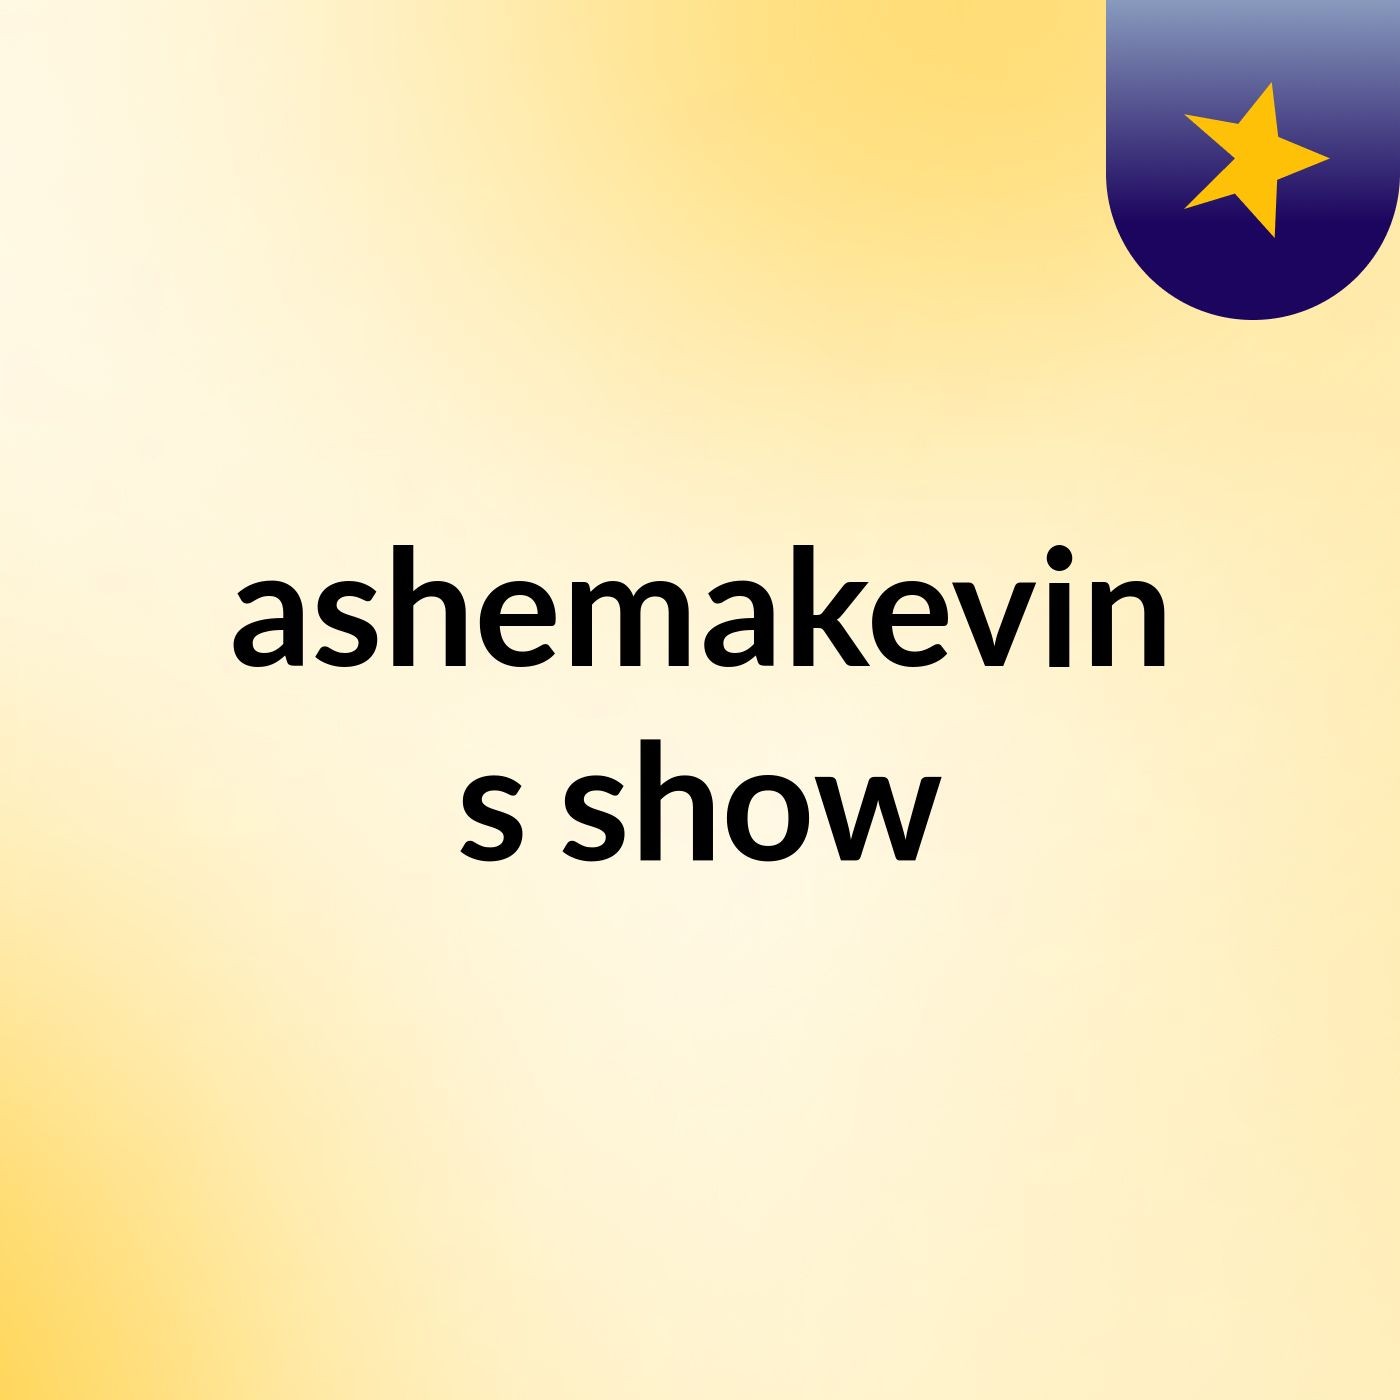 ashemakevin's show